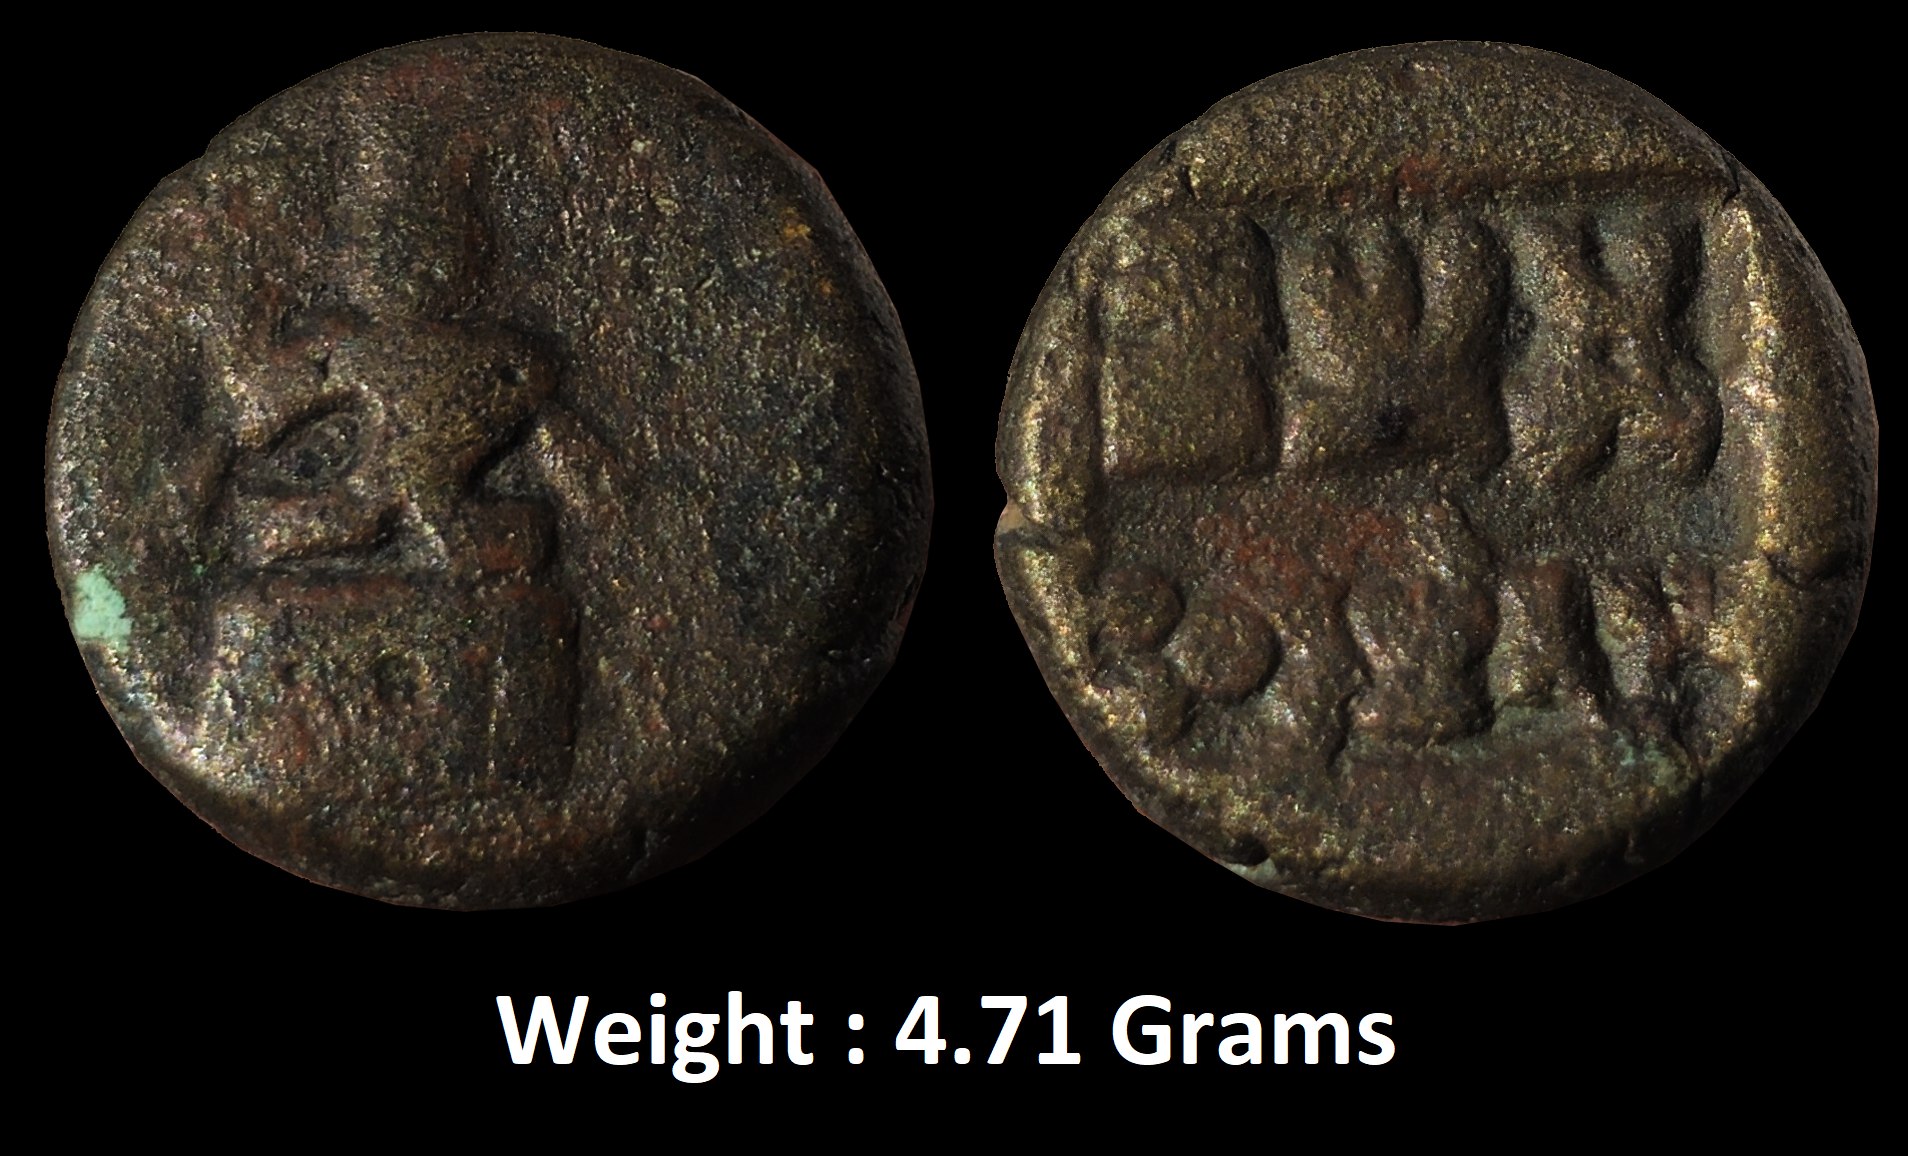 Ancient : Panchala Dynasty, Indramitra, Copper 1/2 Karshapana,
Obv: god indra standing in a square pedestral,
Rev: three panchala symbols in the row above,below rulers name in brahmi 'indramitasa' ; Weight : 4.71 Grams ;
About very fine, Scarce.